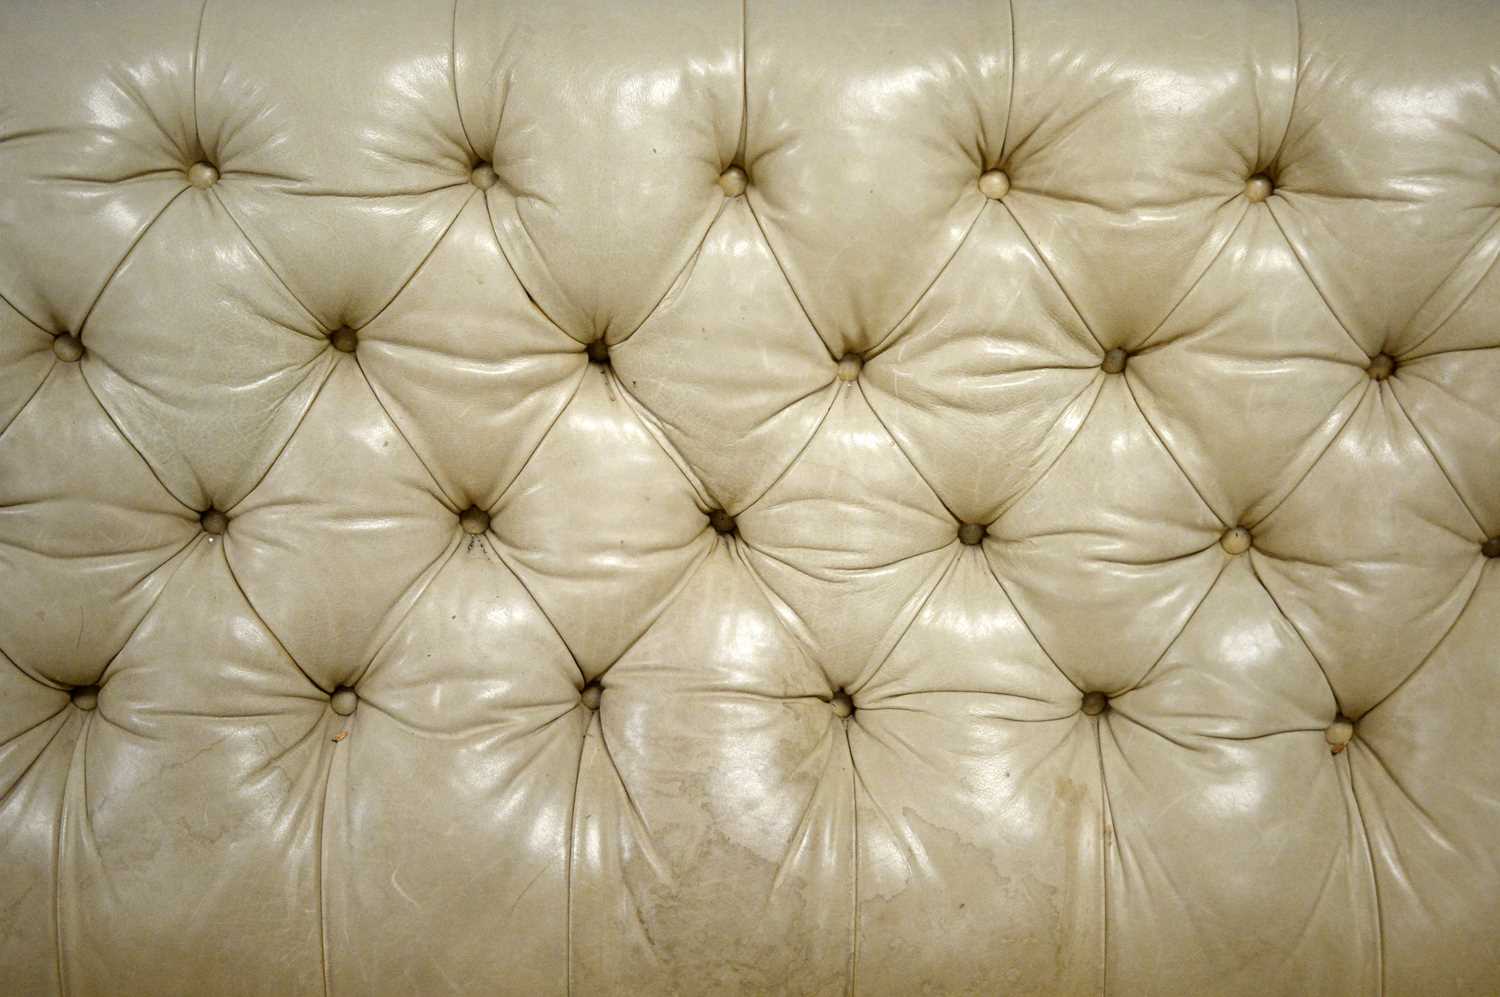 Vanguard Furniture: Chesterfield-style leather upholstered sofa. - Image 3 of 3